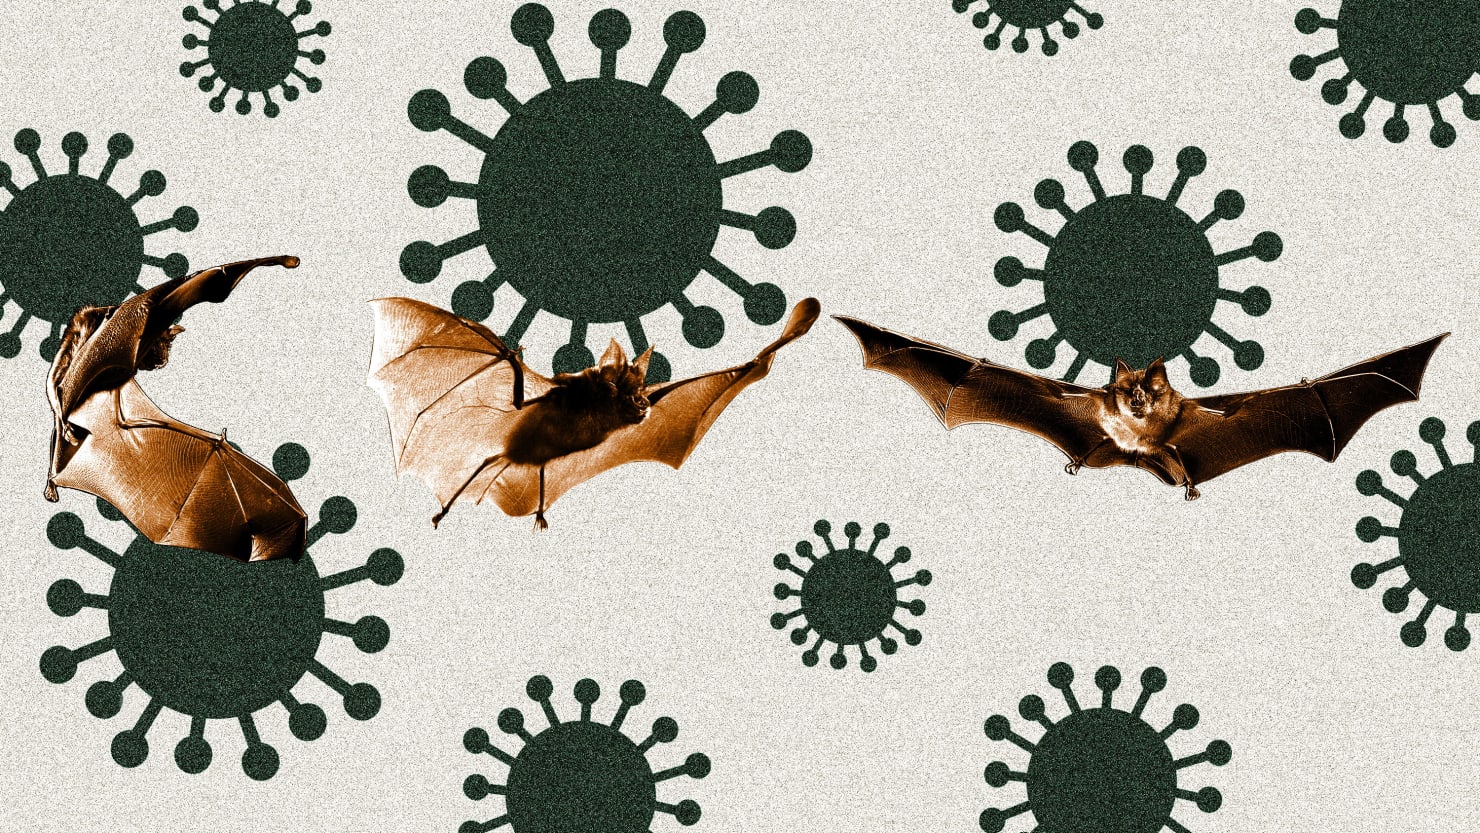 Terrifying Russian Bat Virus Could Spark the Next Pandemic - The Daily Beast